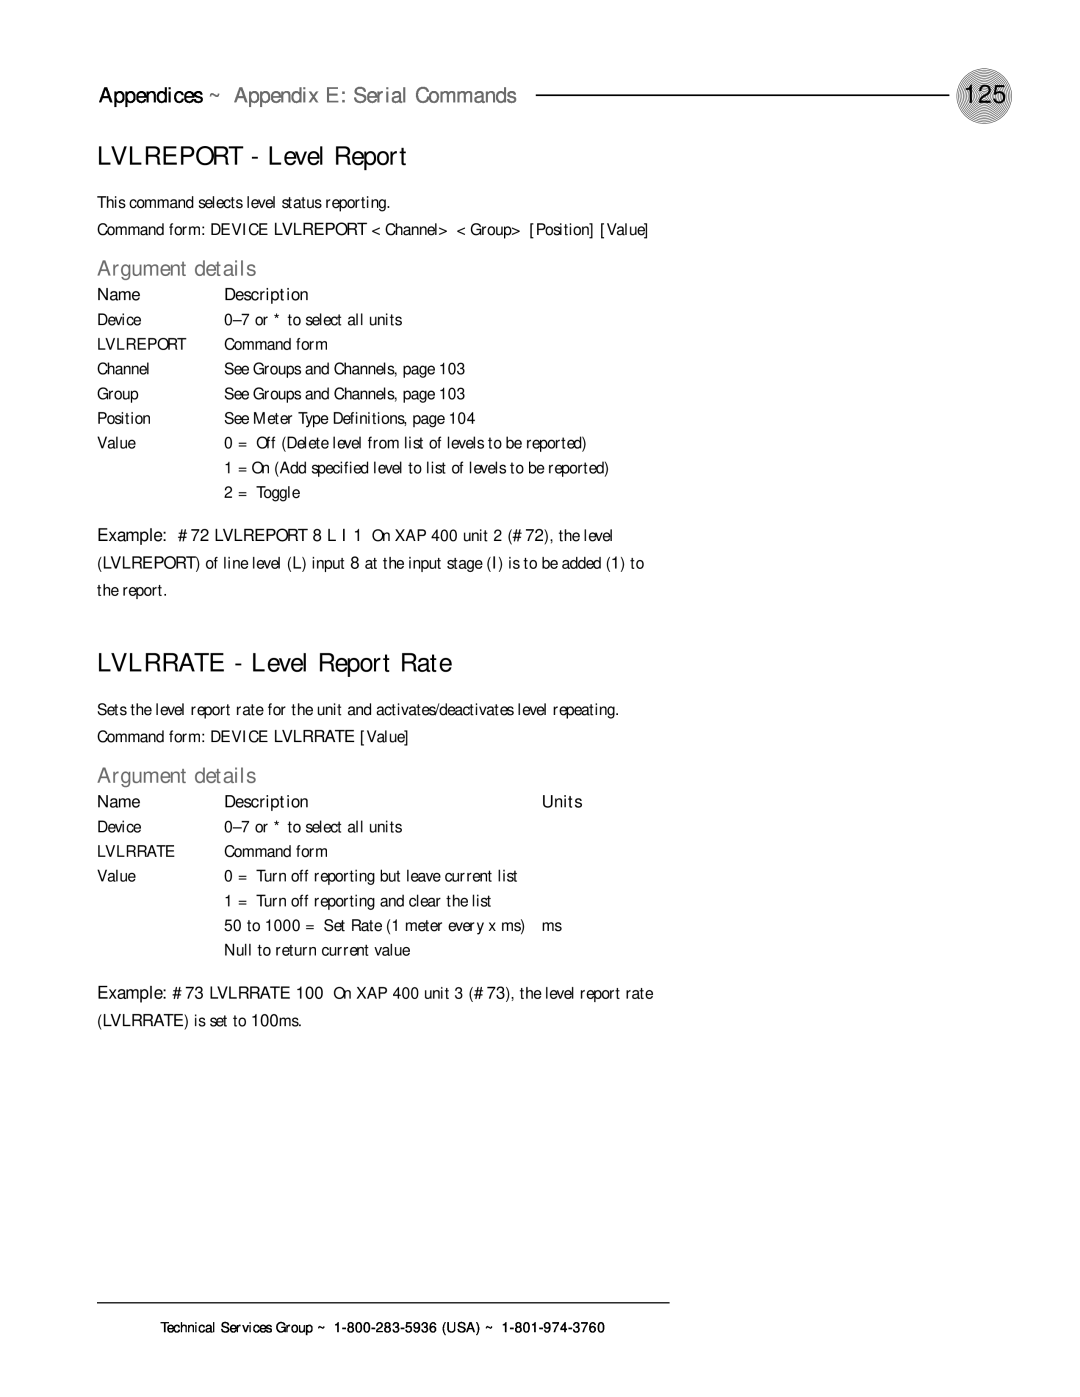 ClearOne comm XAP 400 LVLREPORT - Level Report, LVLRRATE - Level Report Rate, Appendices ~ Appendix E: Serial Commands 